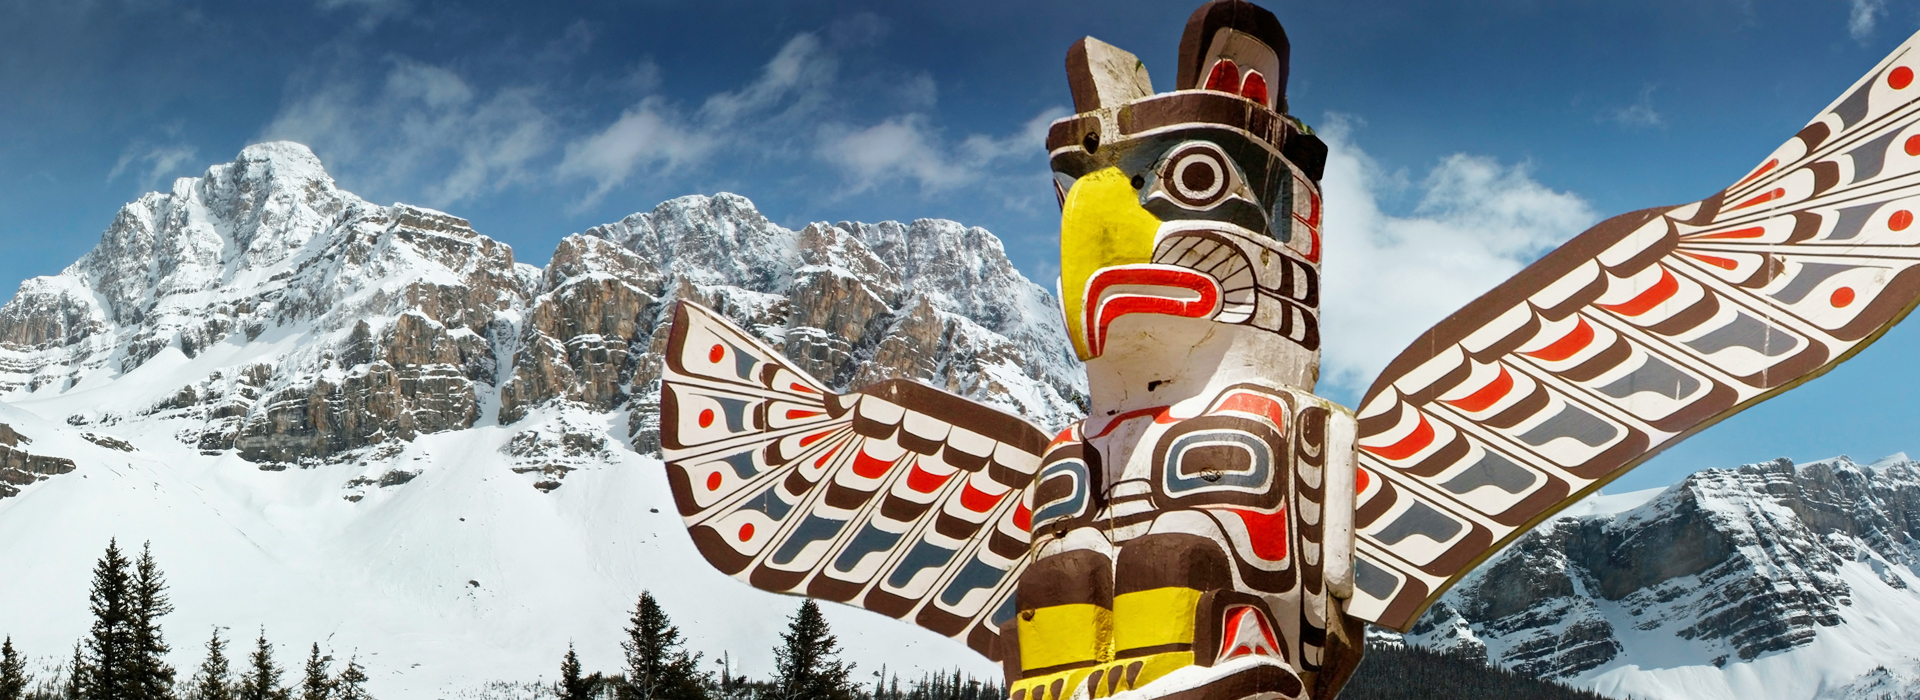 First Nation Totem pole, British Columbia, Canada